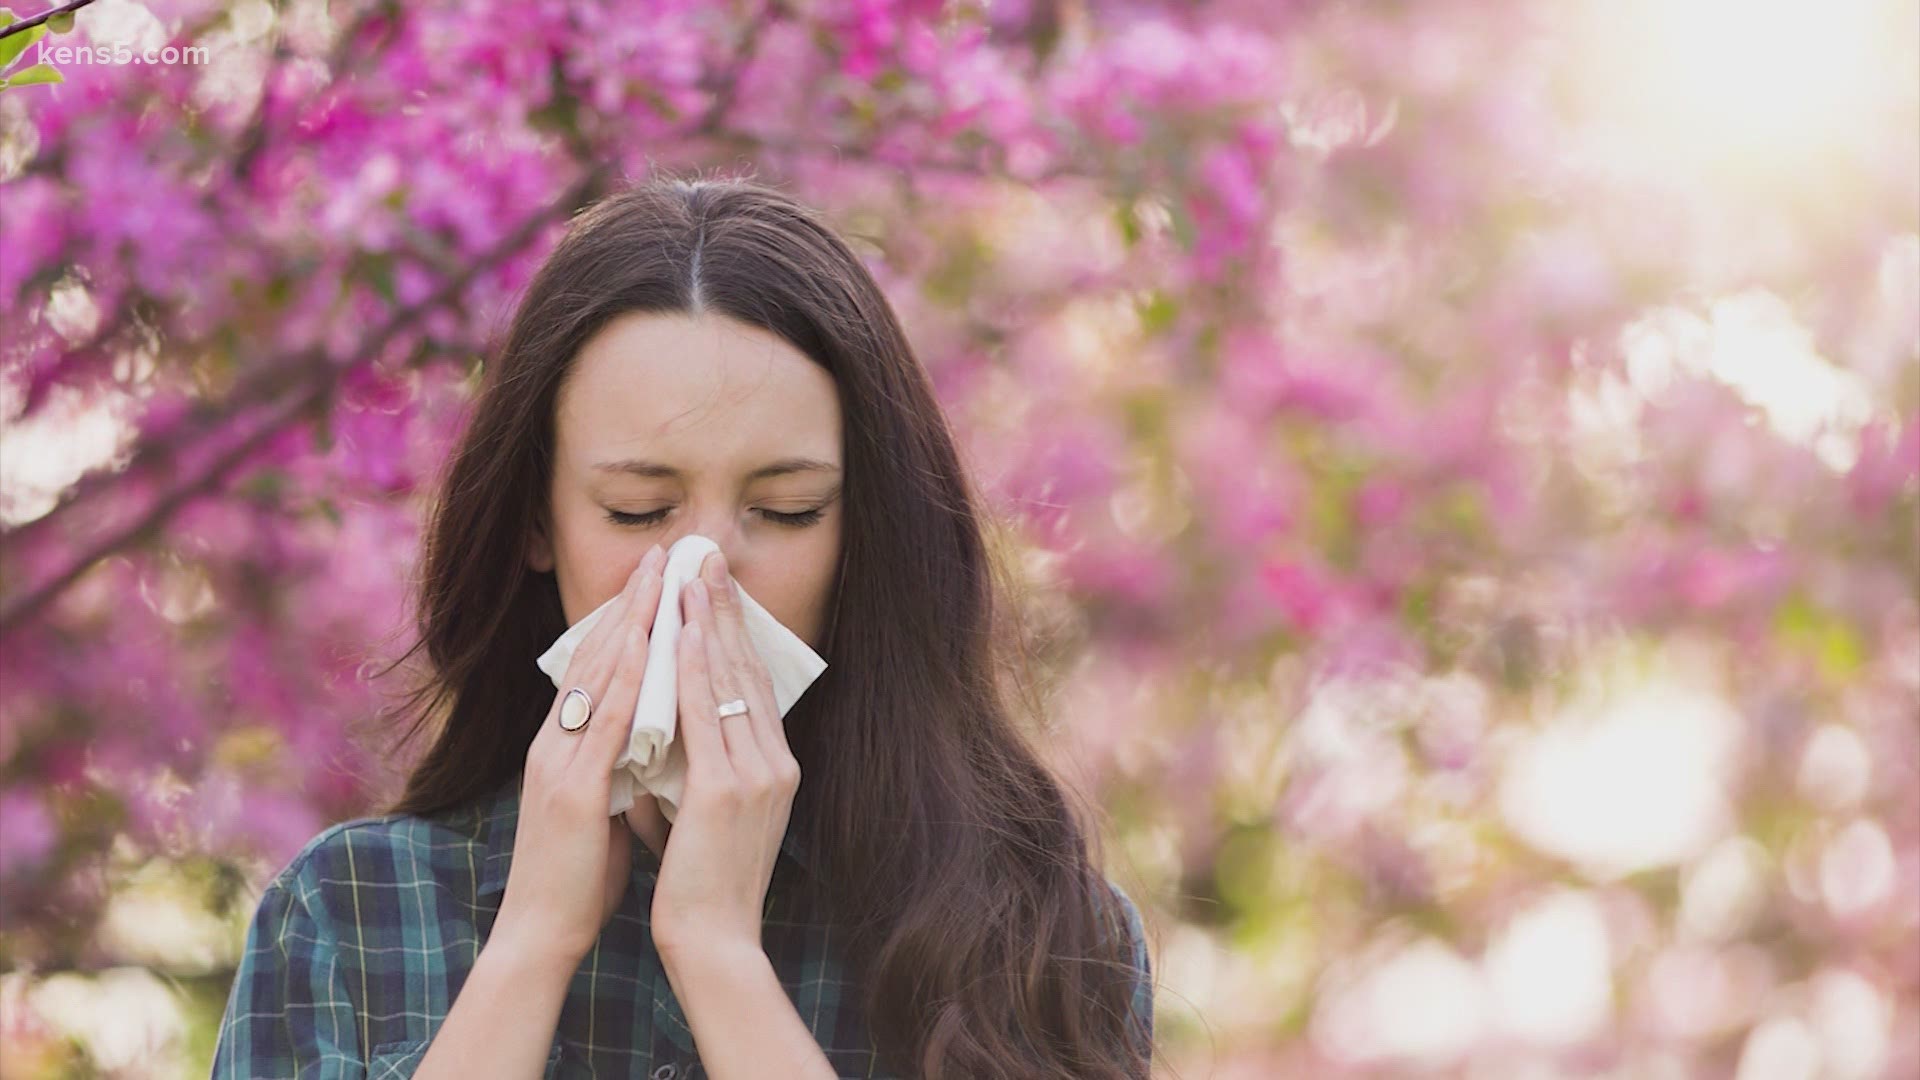 Allergy sufferers are feeling it in Texas.